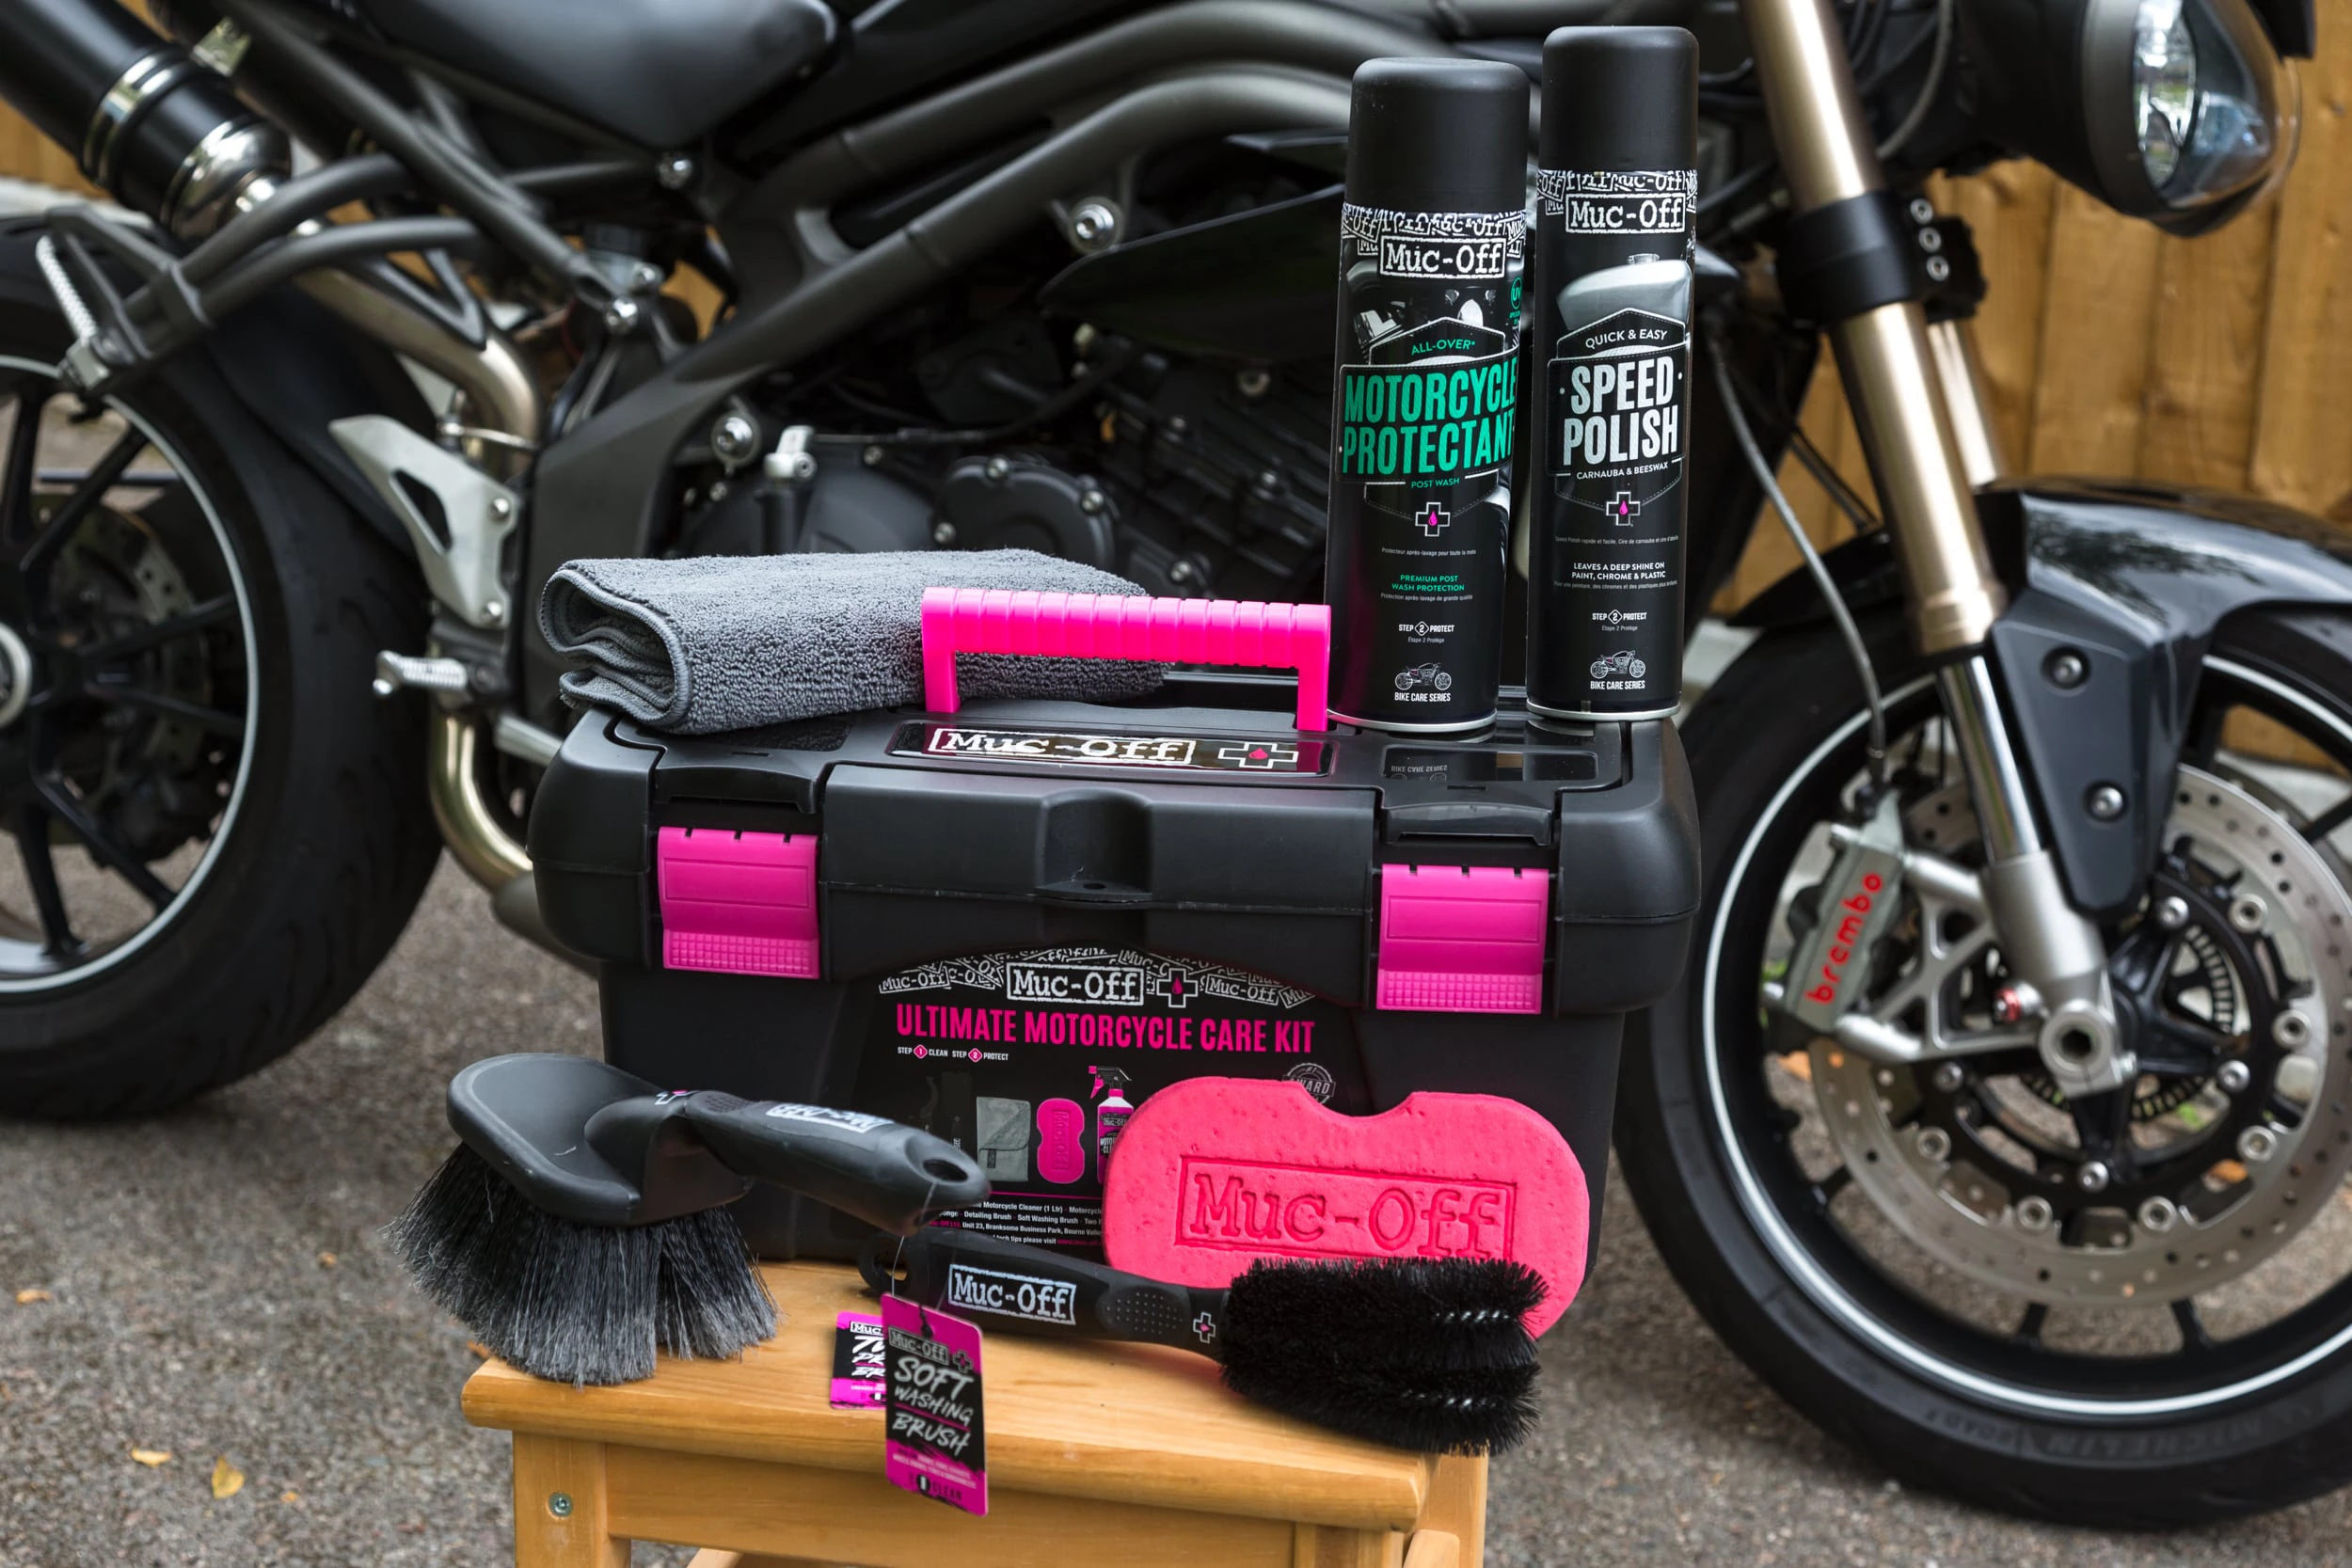 Cleaning Your Motorcycle - A Beginners Guide